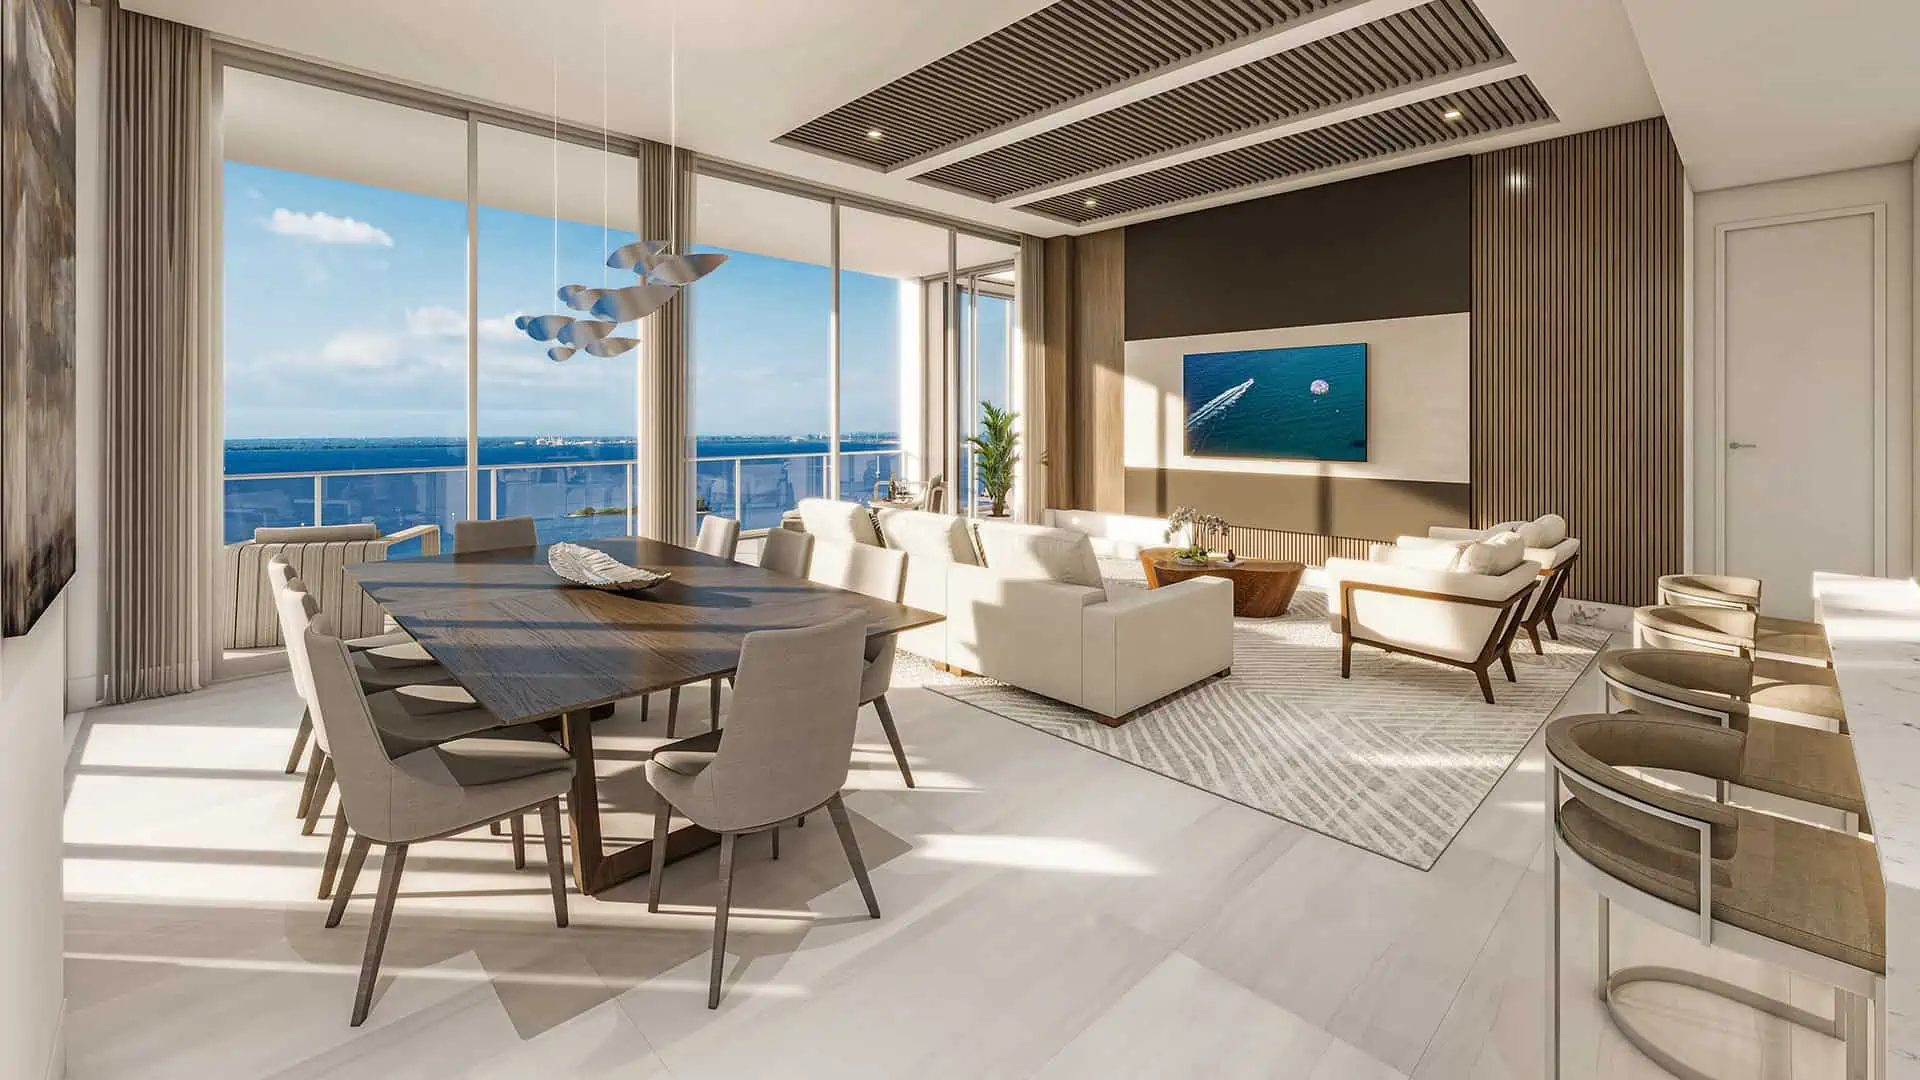 Rendering of a large living room area with couches set along an open window with a water view